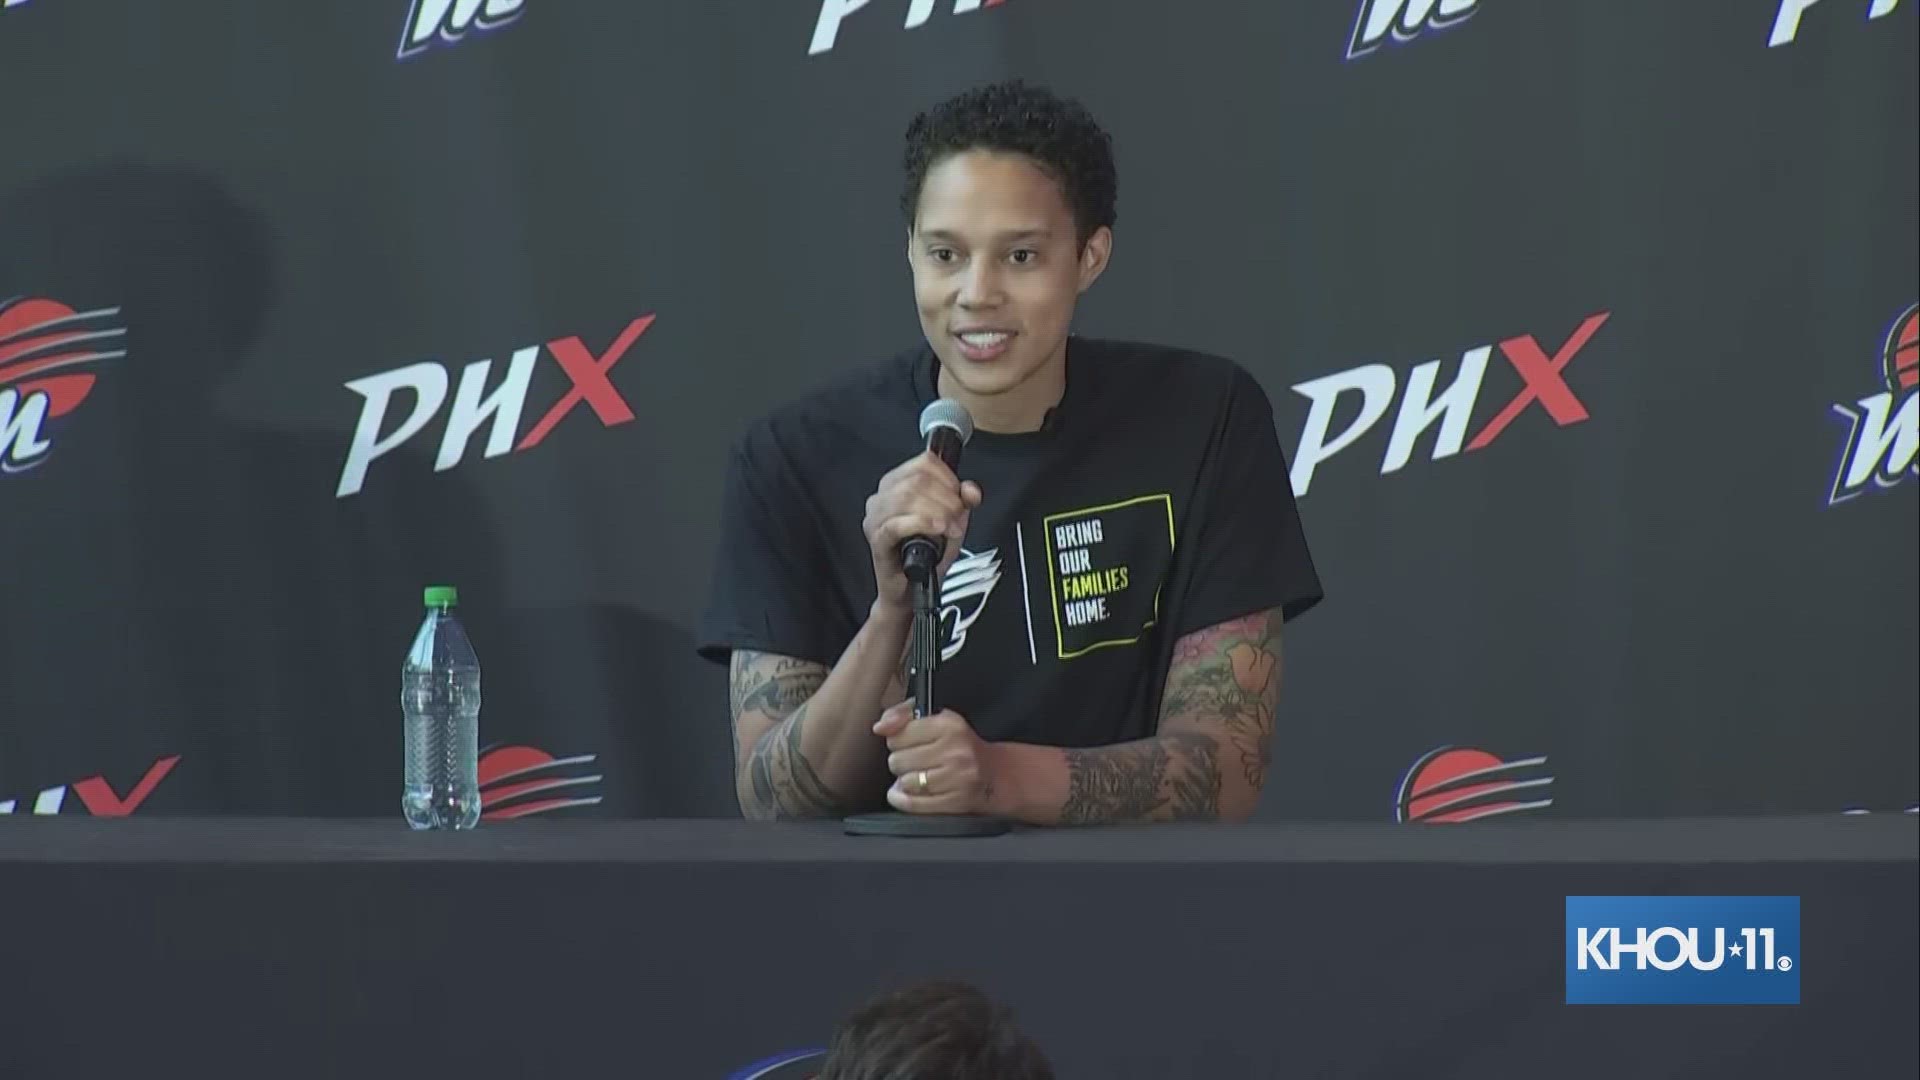 Griner had to pause and compose herself while speaking to reporters for the first time since a nearly 10-month detainment in Russia on drug-related charges.